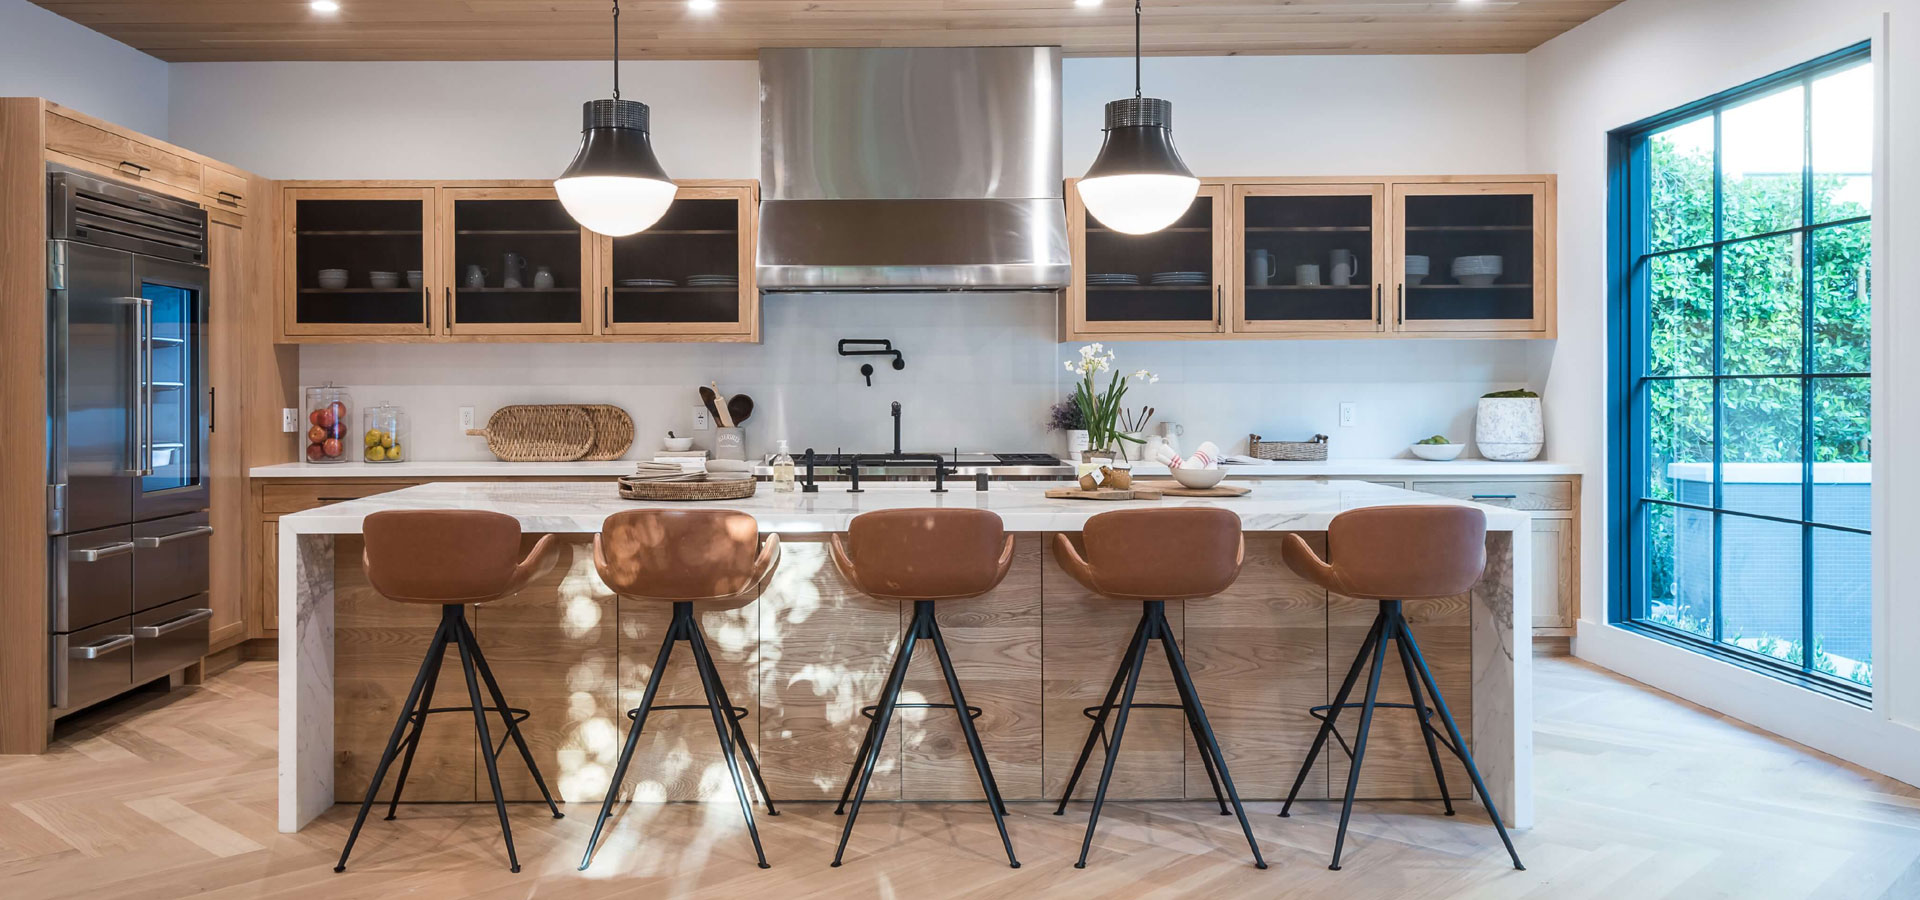 A kitchen with several stools and lights in it.